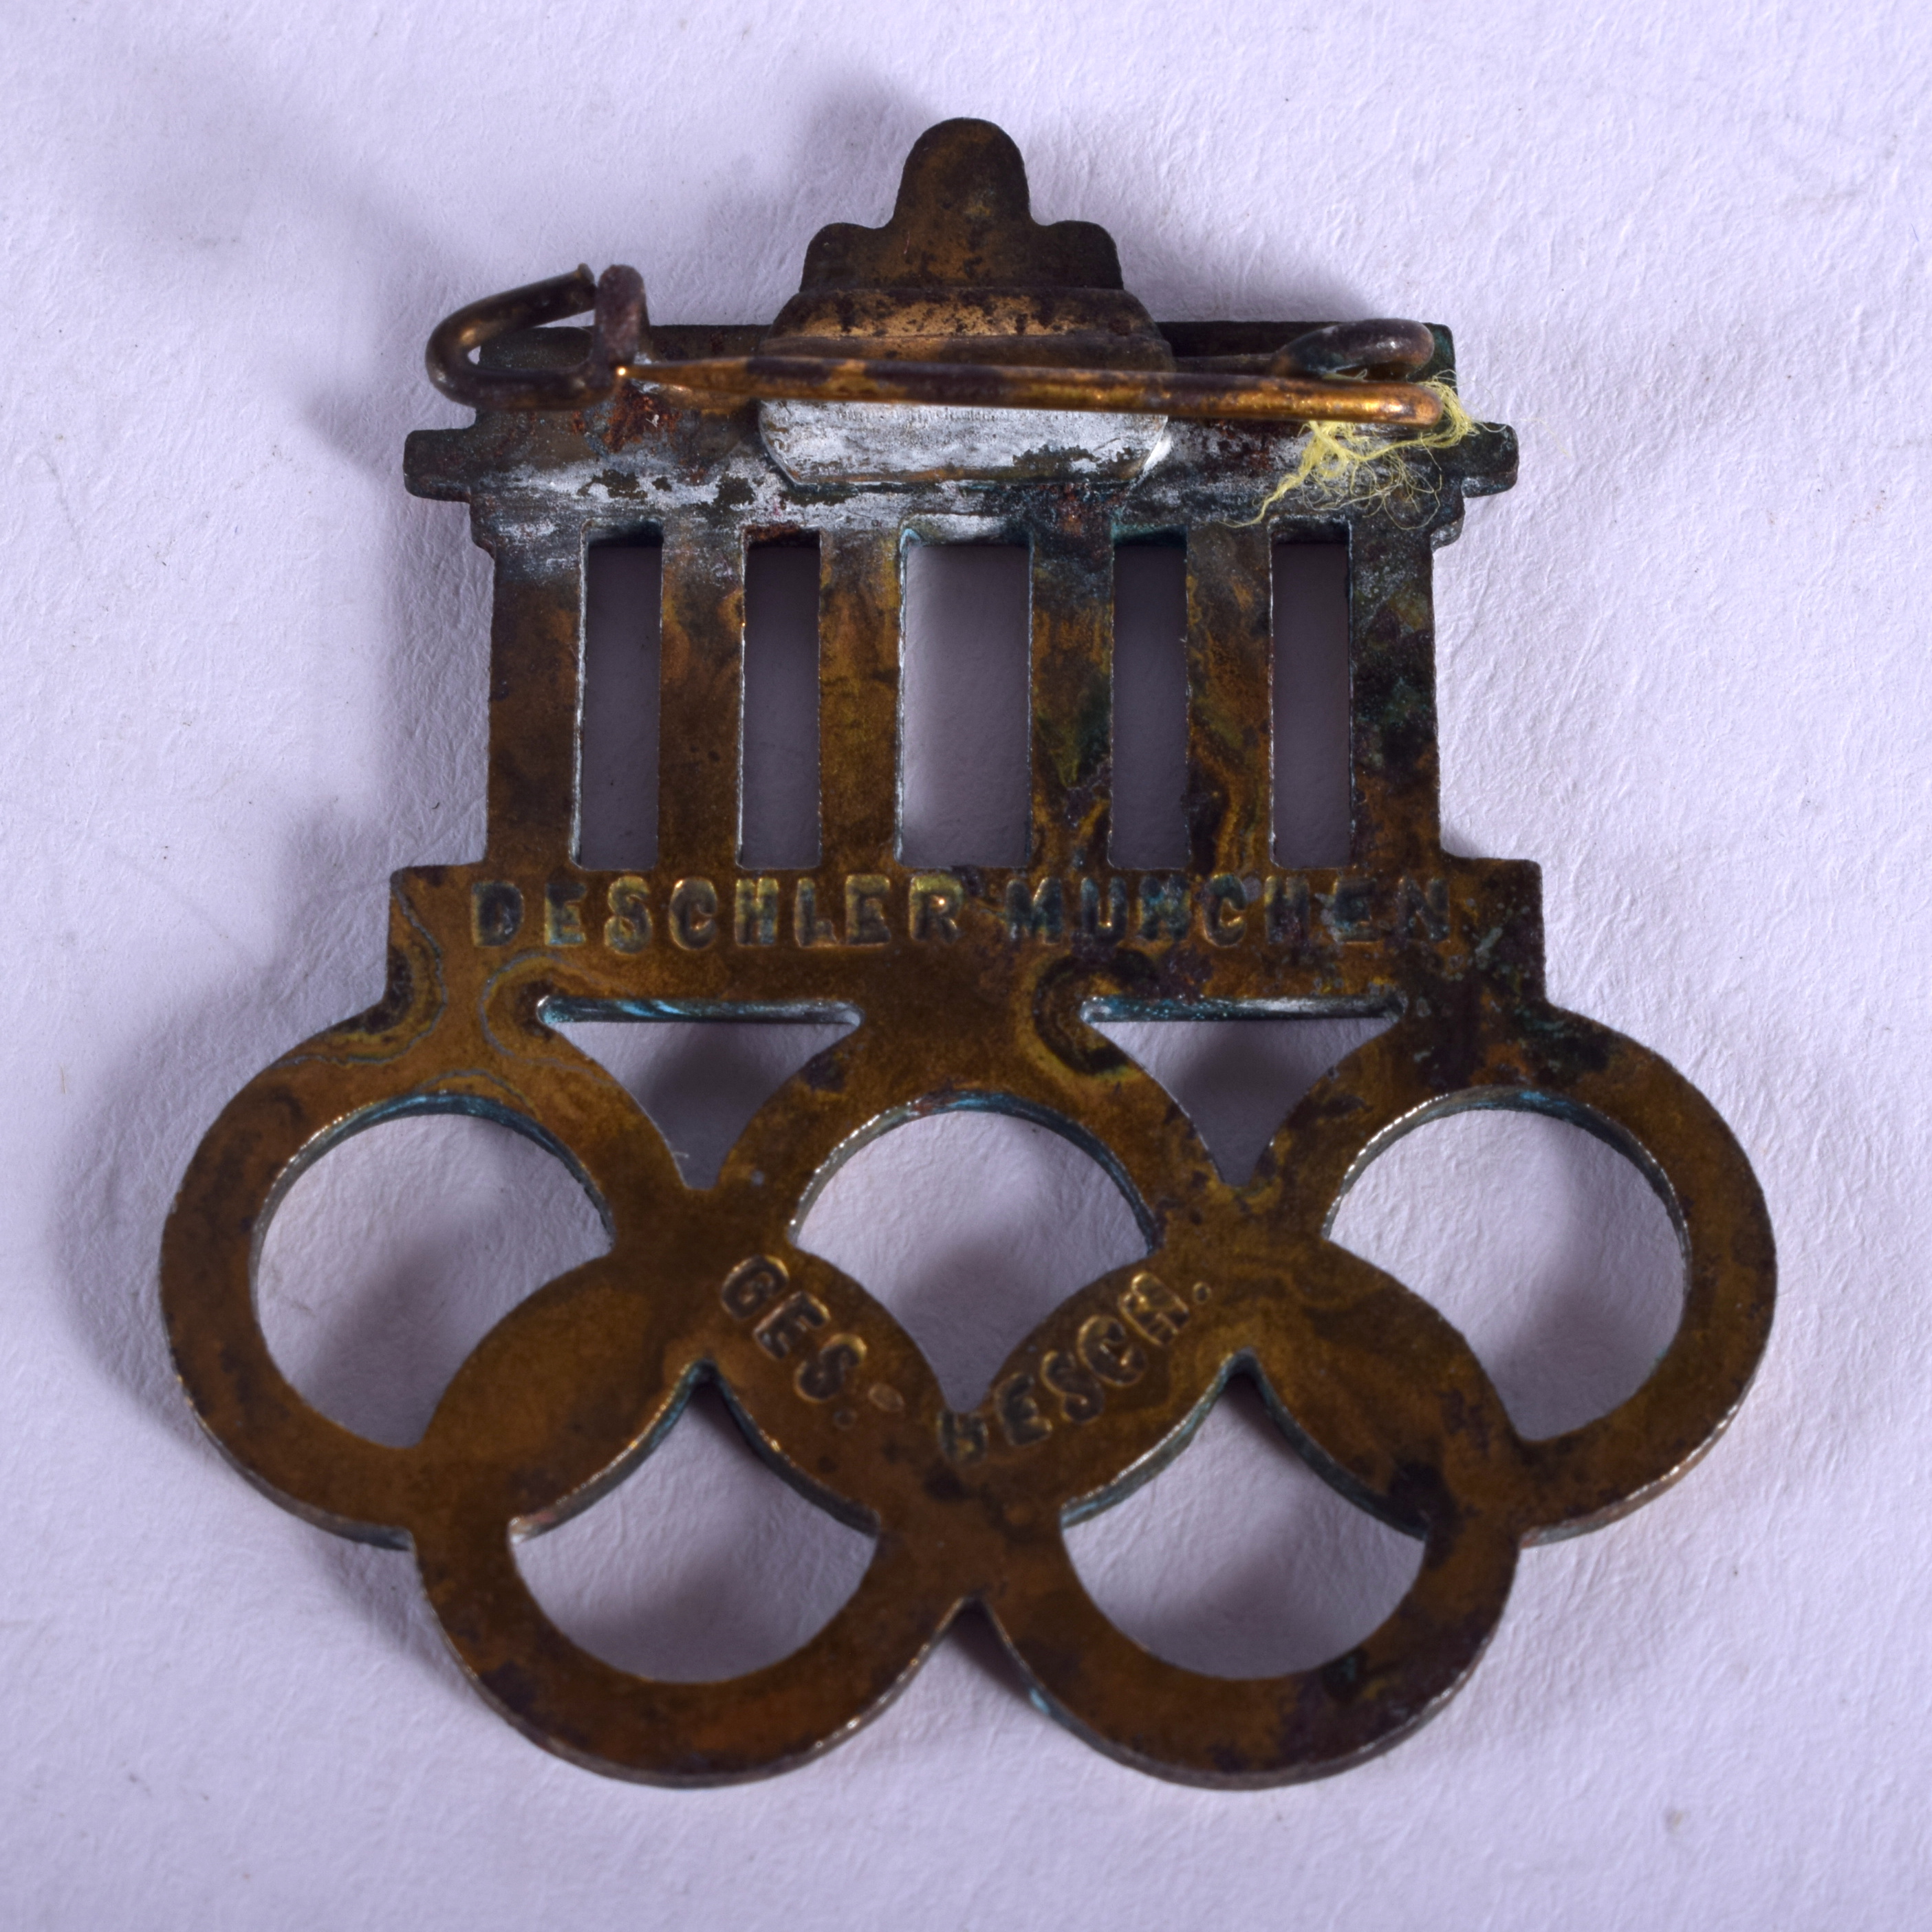 A RARE 1935 ENAMELLED OLYMPIC BROOCH. 4.9 grams. 3.25 cm wide. - Image 2 of 2